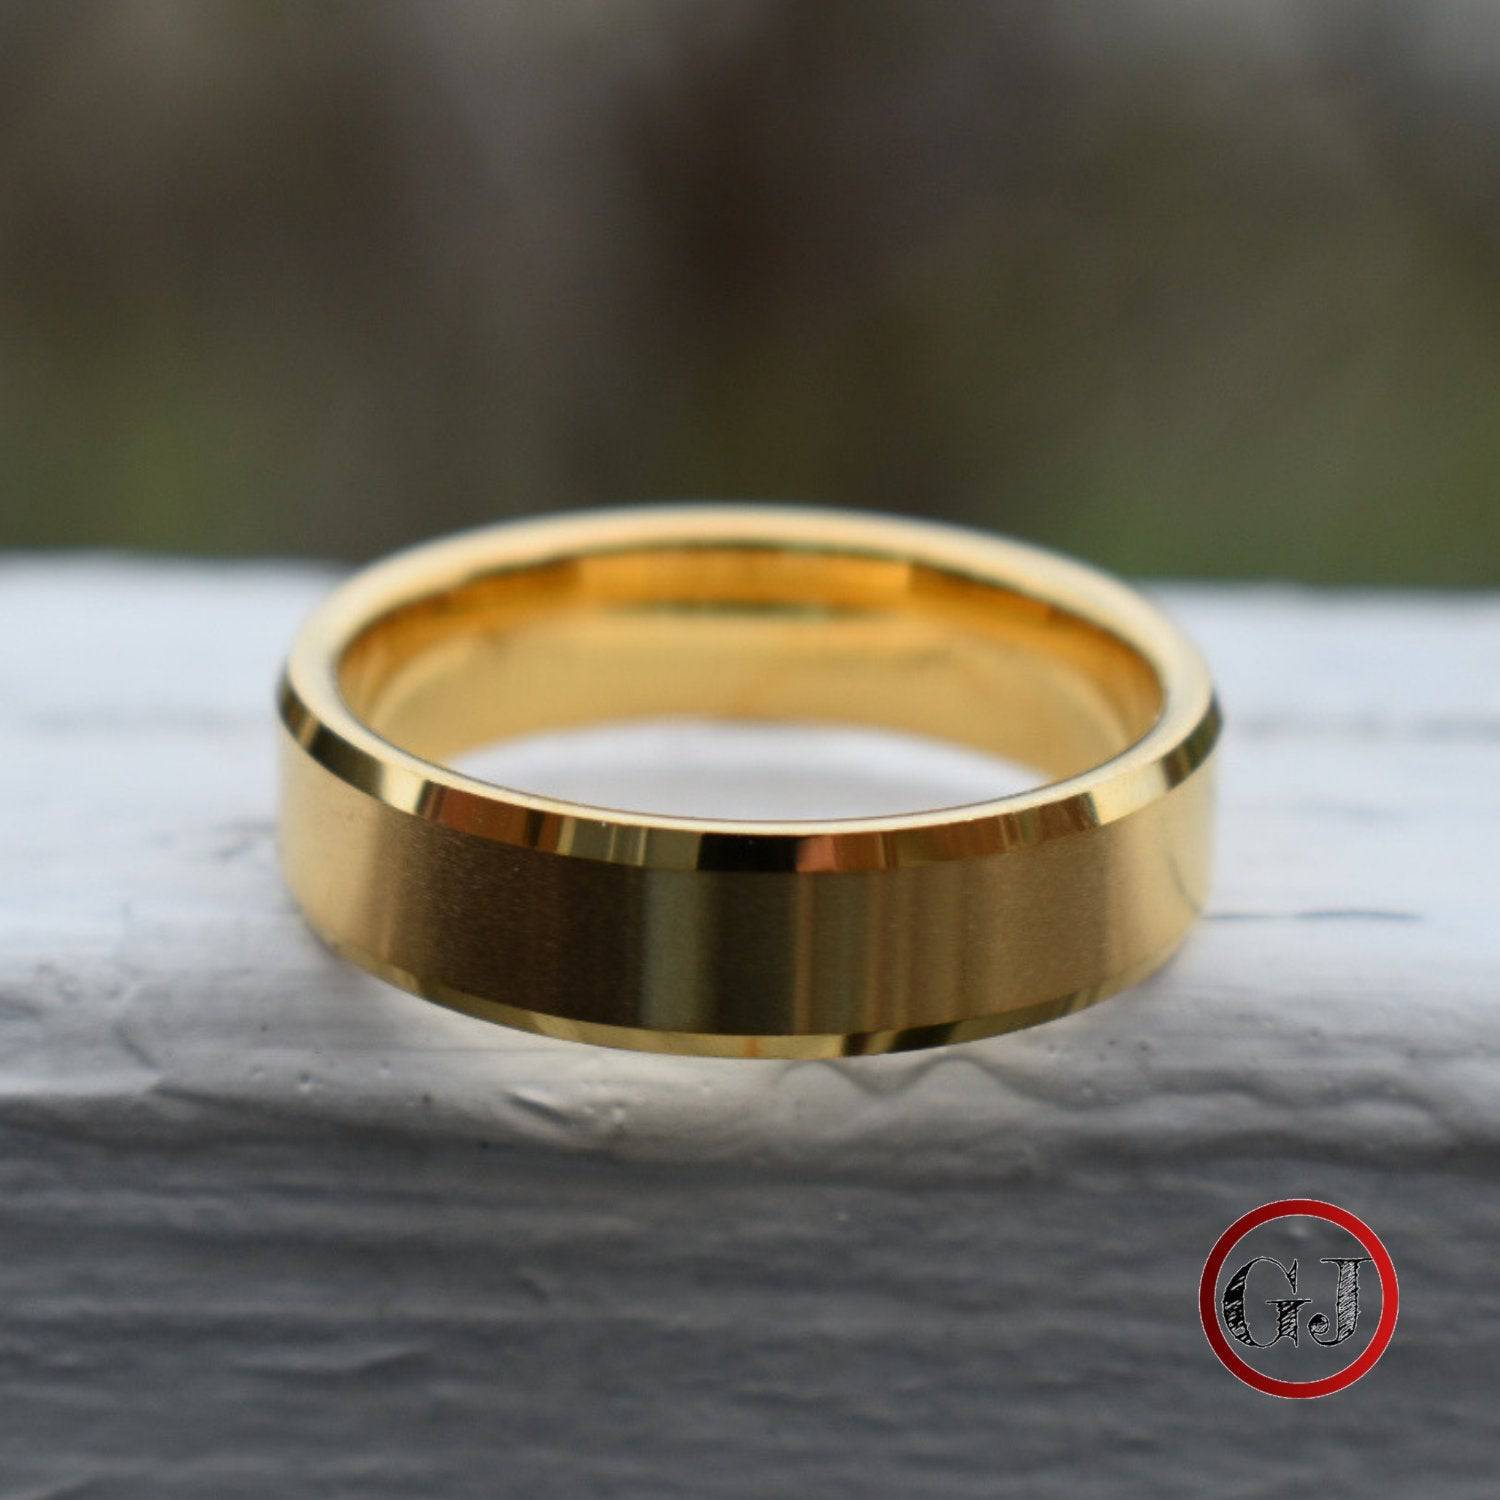 Tungsten 6mm Ring Brushed Gold with Bevelled Edges and Comfort fit band - Tungsten Titans